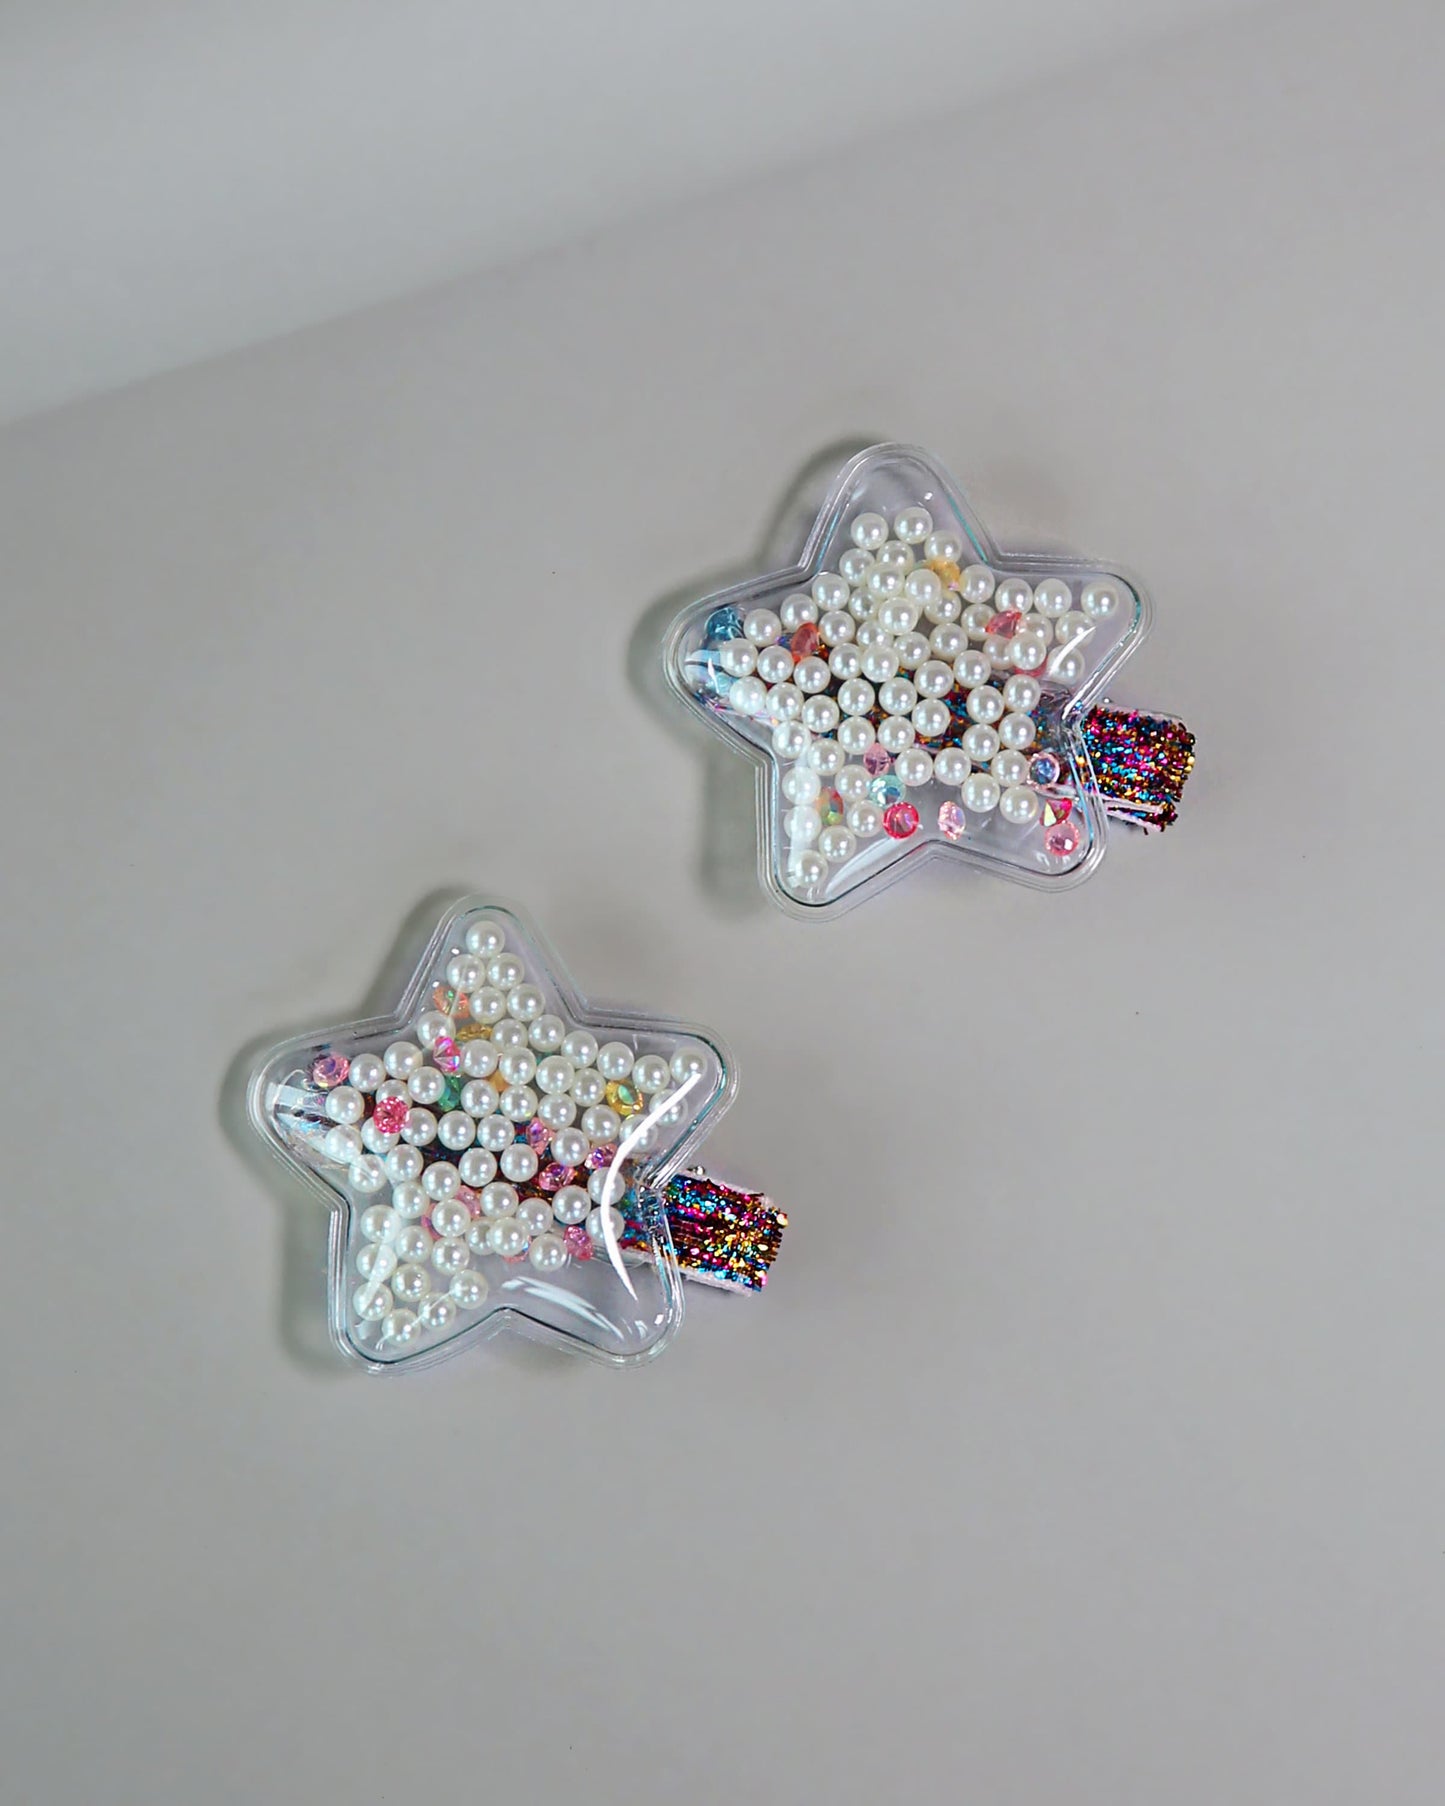 Star White Pearl Shaker Hair Clip Pair - Confetti Hair Clips - Rainbow Hair Clips - Clear Shaker Hair Clips - Pigtail Clips